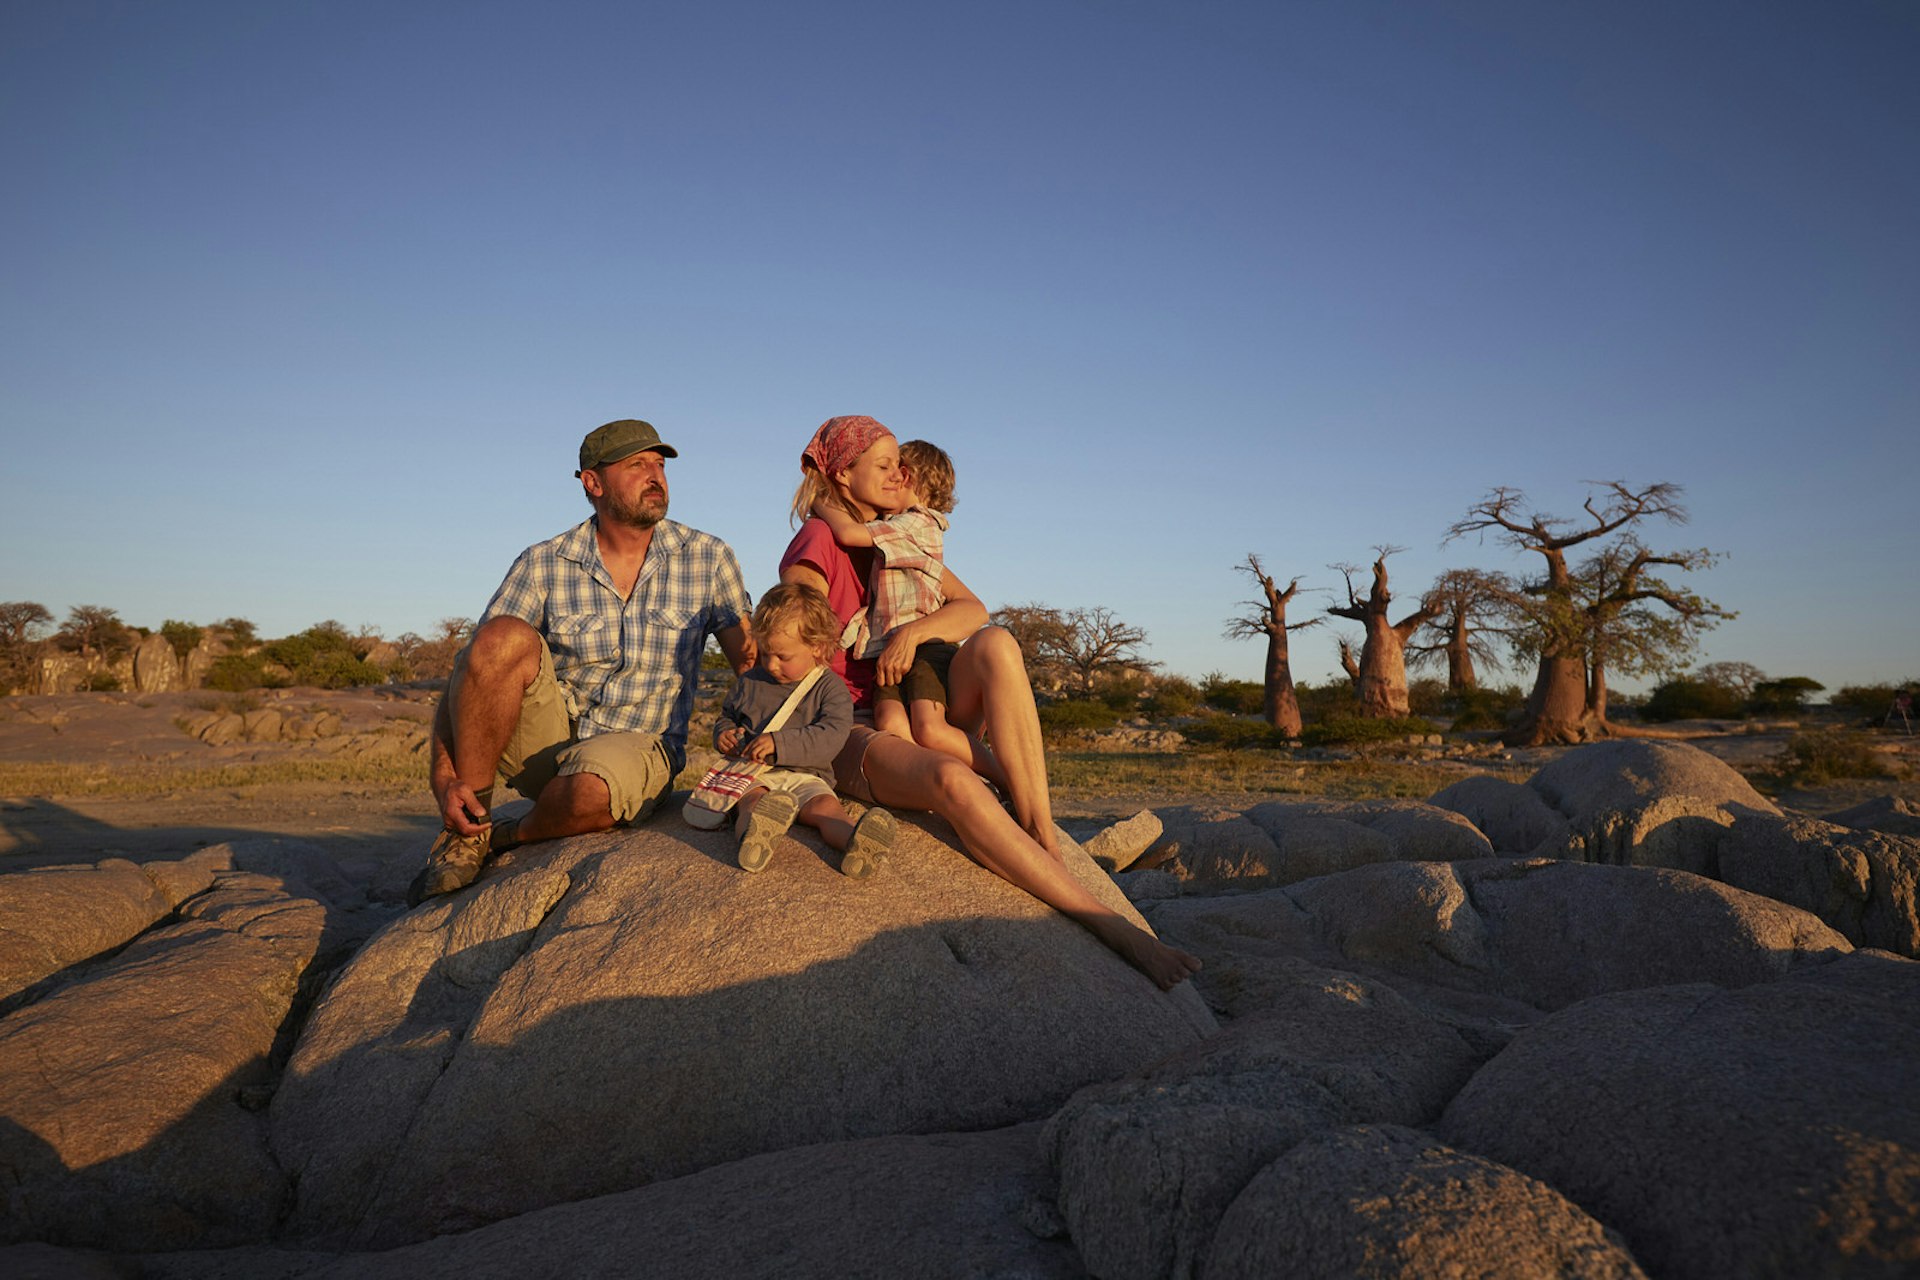 Romantic trip with kids in tow – a family watch the sunset on Kubu Island, Botswana.